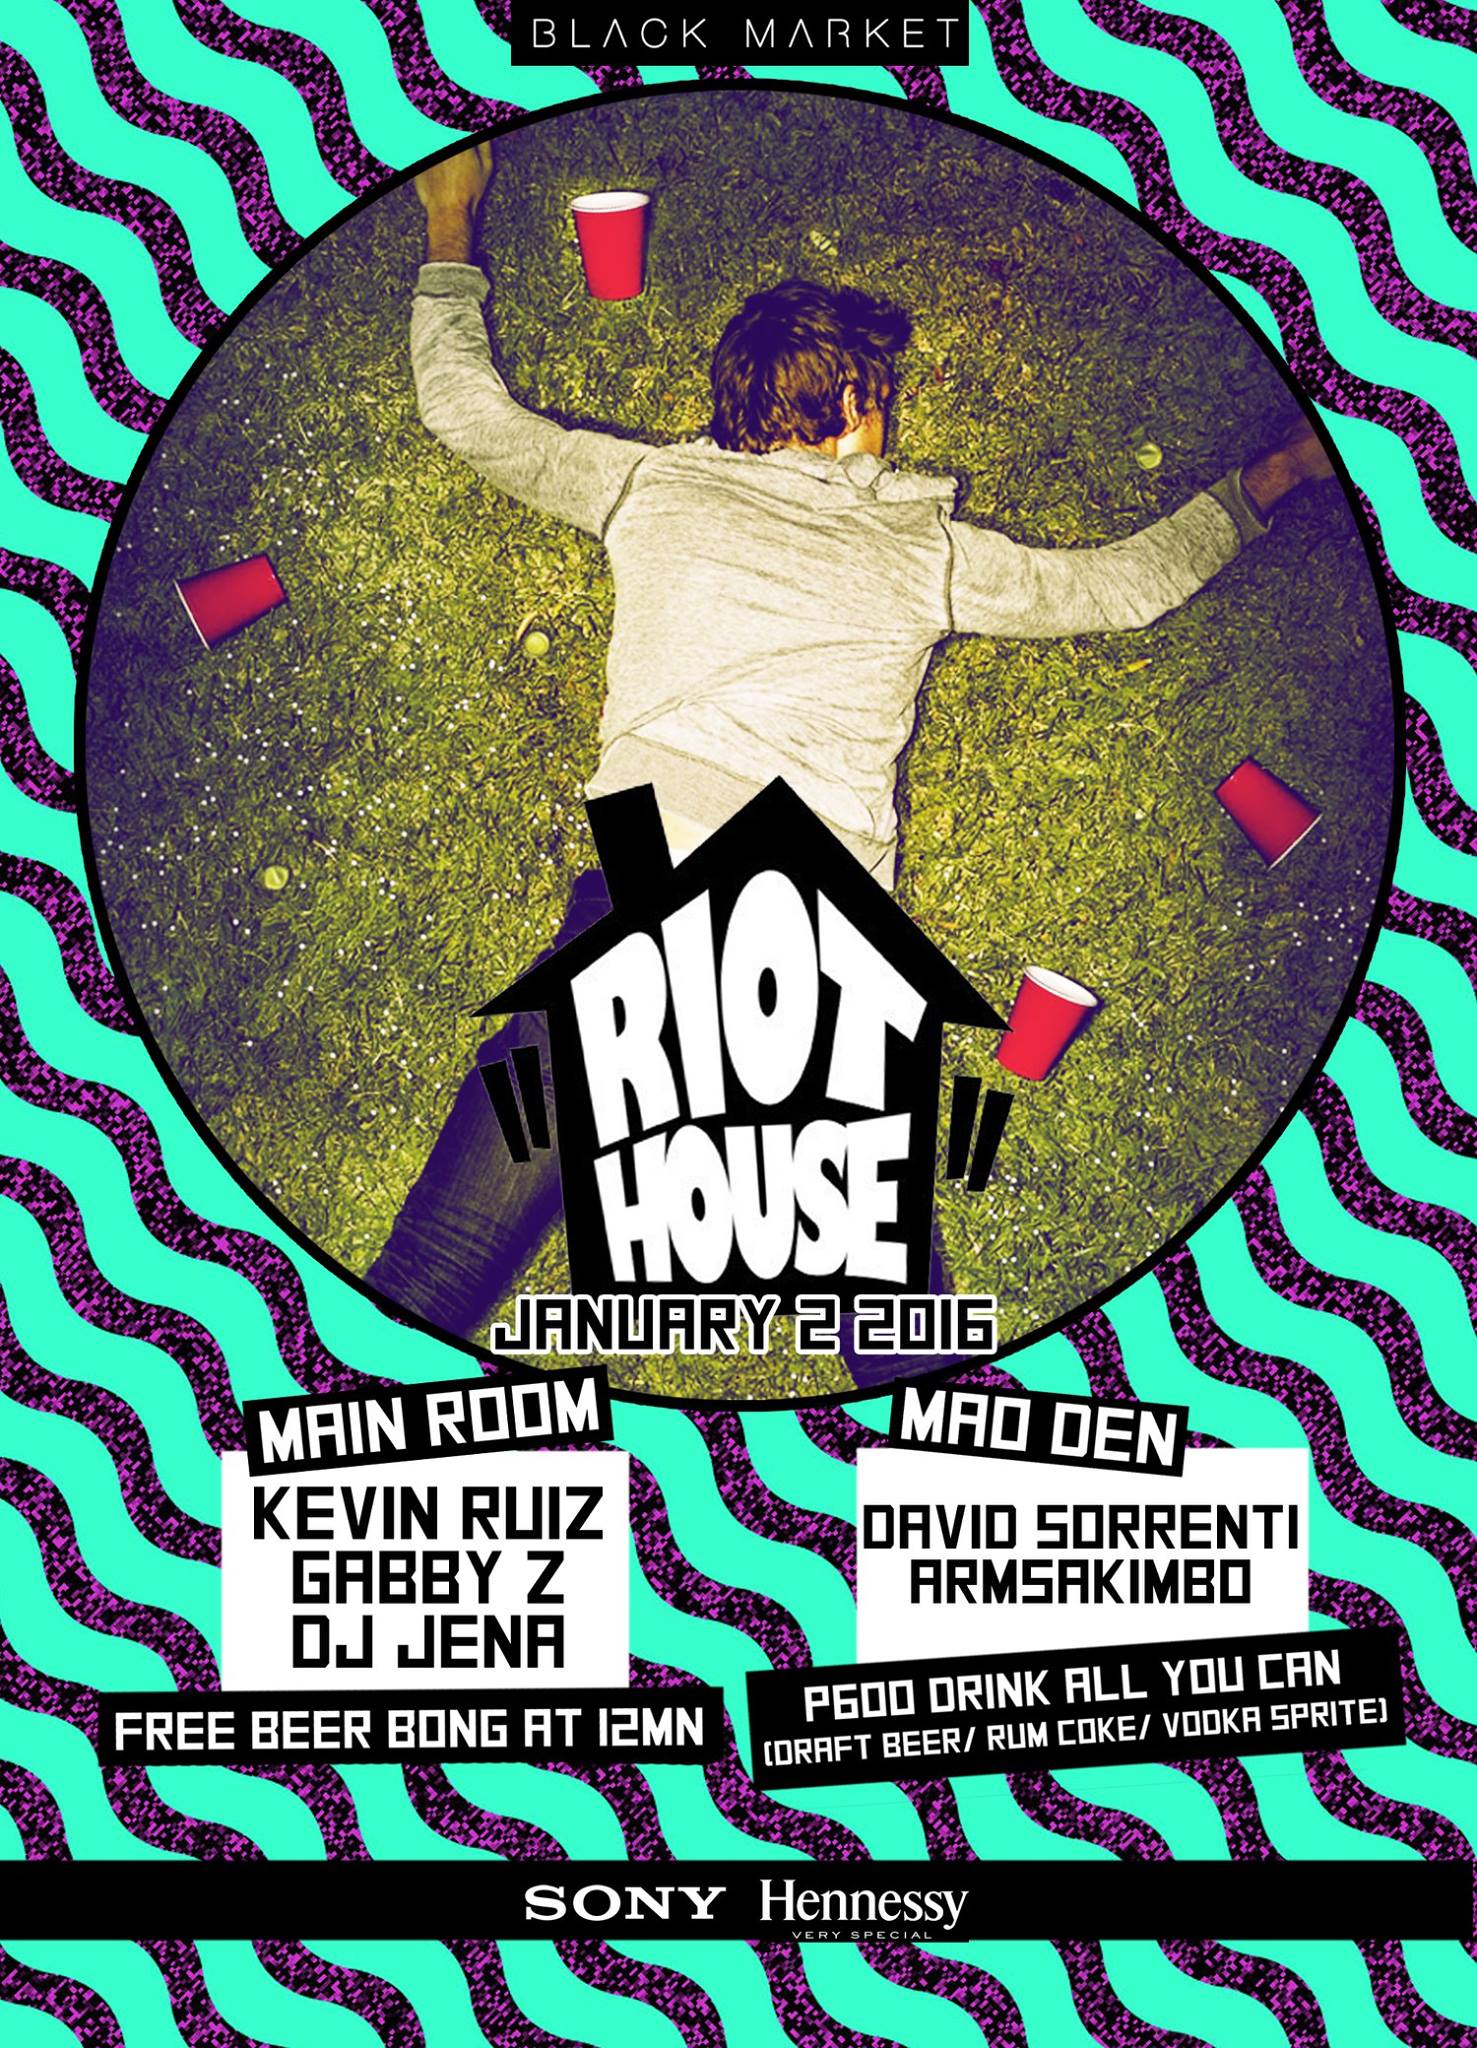 RIOT HOUSE **FIRST RIOT HOUSE OF THE YEAR** clock Saturday January 2, 2016 at 10 PM 3 days from now · 87°F / 73°F Chance of Rain pin Show Map Black Market WAREHOUSE 5, LA FUERZA COMPOUND 2, SABIO ST., Makati, Philippines Black Market Presents **FIRST RIOT HOUSE OF THE YEAR** MAIN ROOM: Gabby Z x DJ JENA x Kevin Ruiz MAO DEN: David Sorrenti x ArmsAkimbo ------------------------------- RIOT HOUSE PROMO: P600 ALL YOU CAN DRINK (Draft Beer, Rum Coke, Vodka Sprite) FREE BEER BONG 12MN